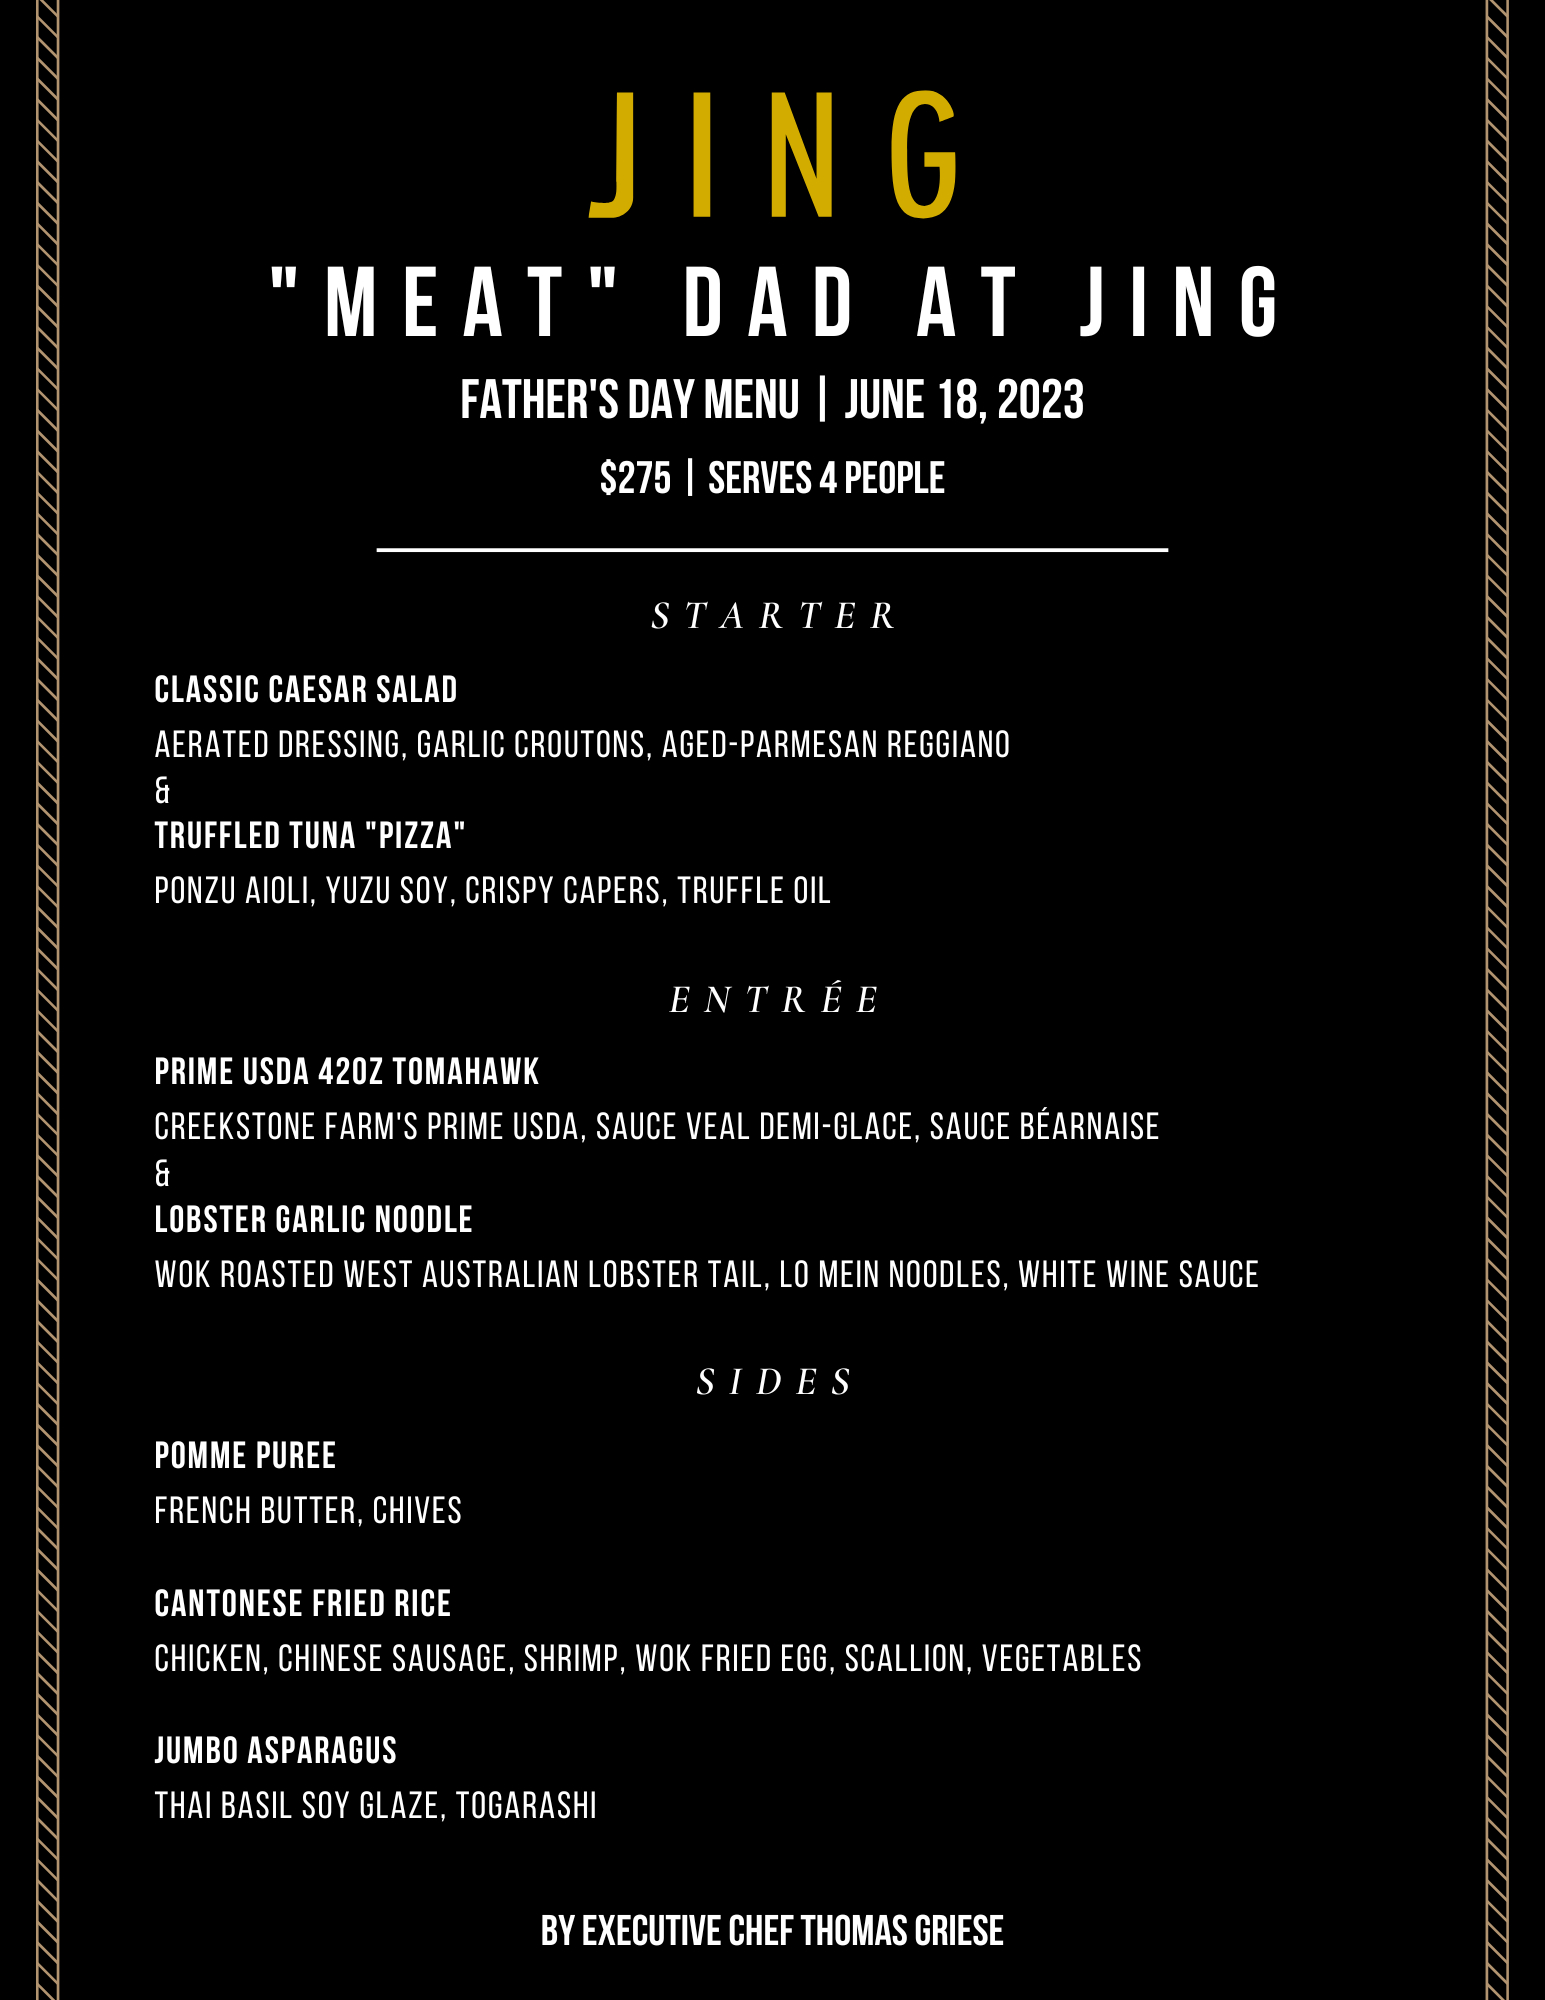 "Meat Dad at JING" for a Father's Day Experience Fit for a King at JING in Downtown Summerlin